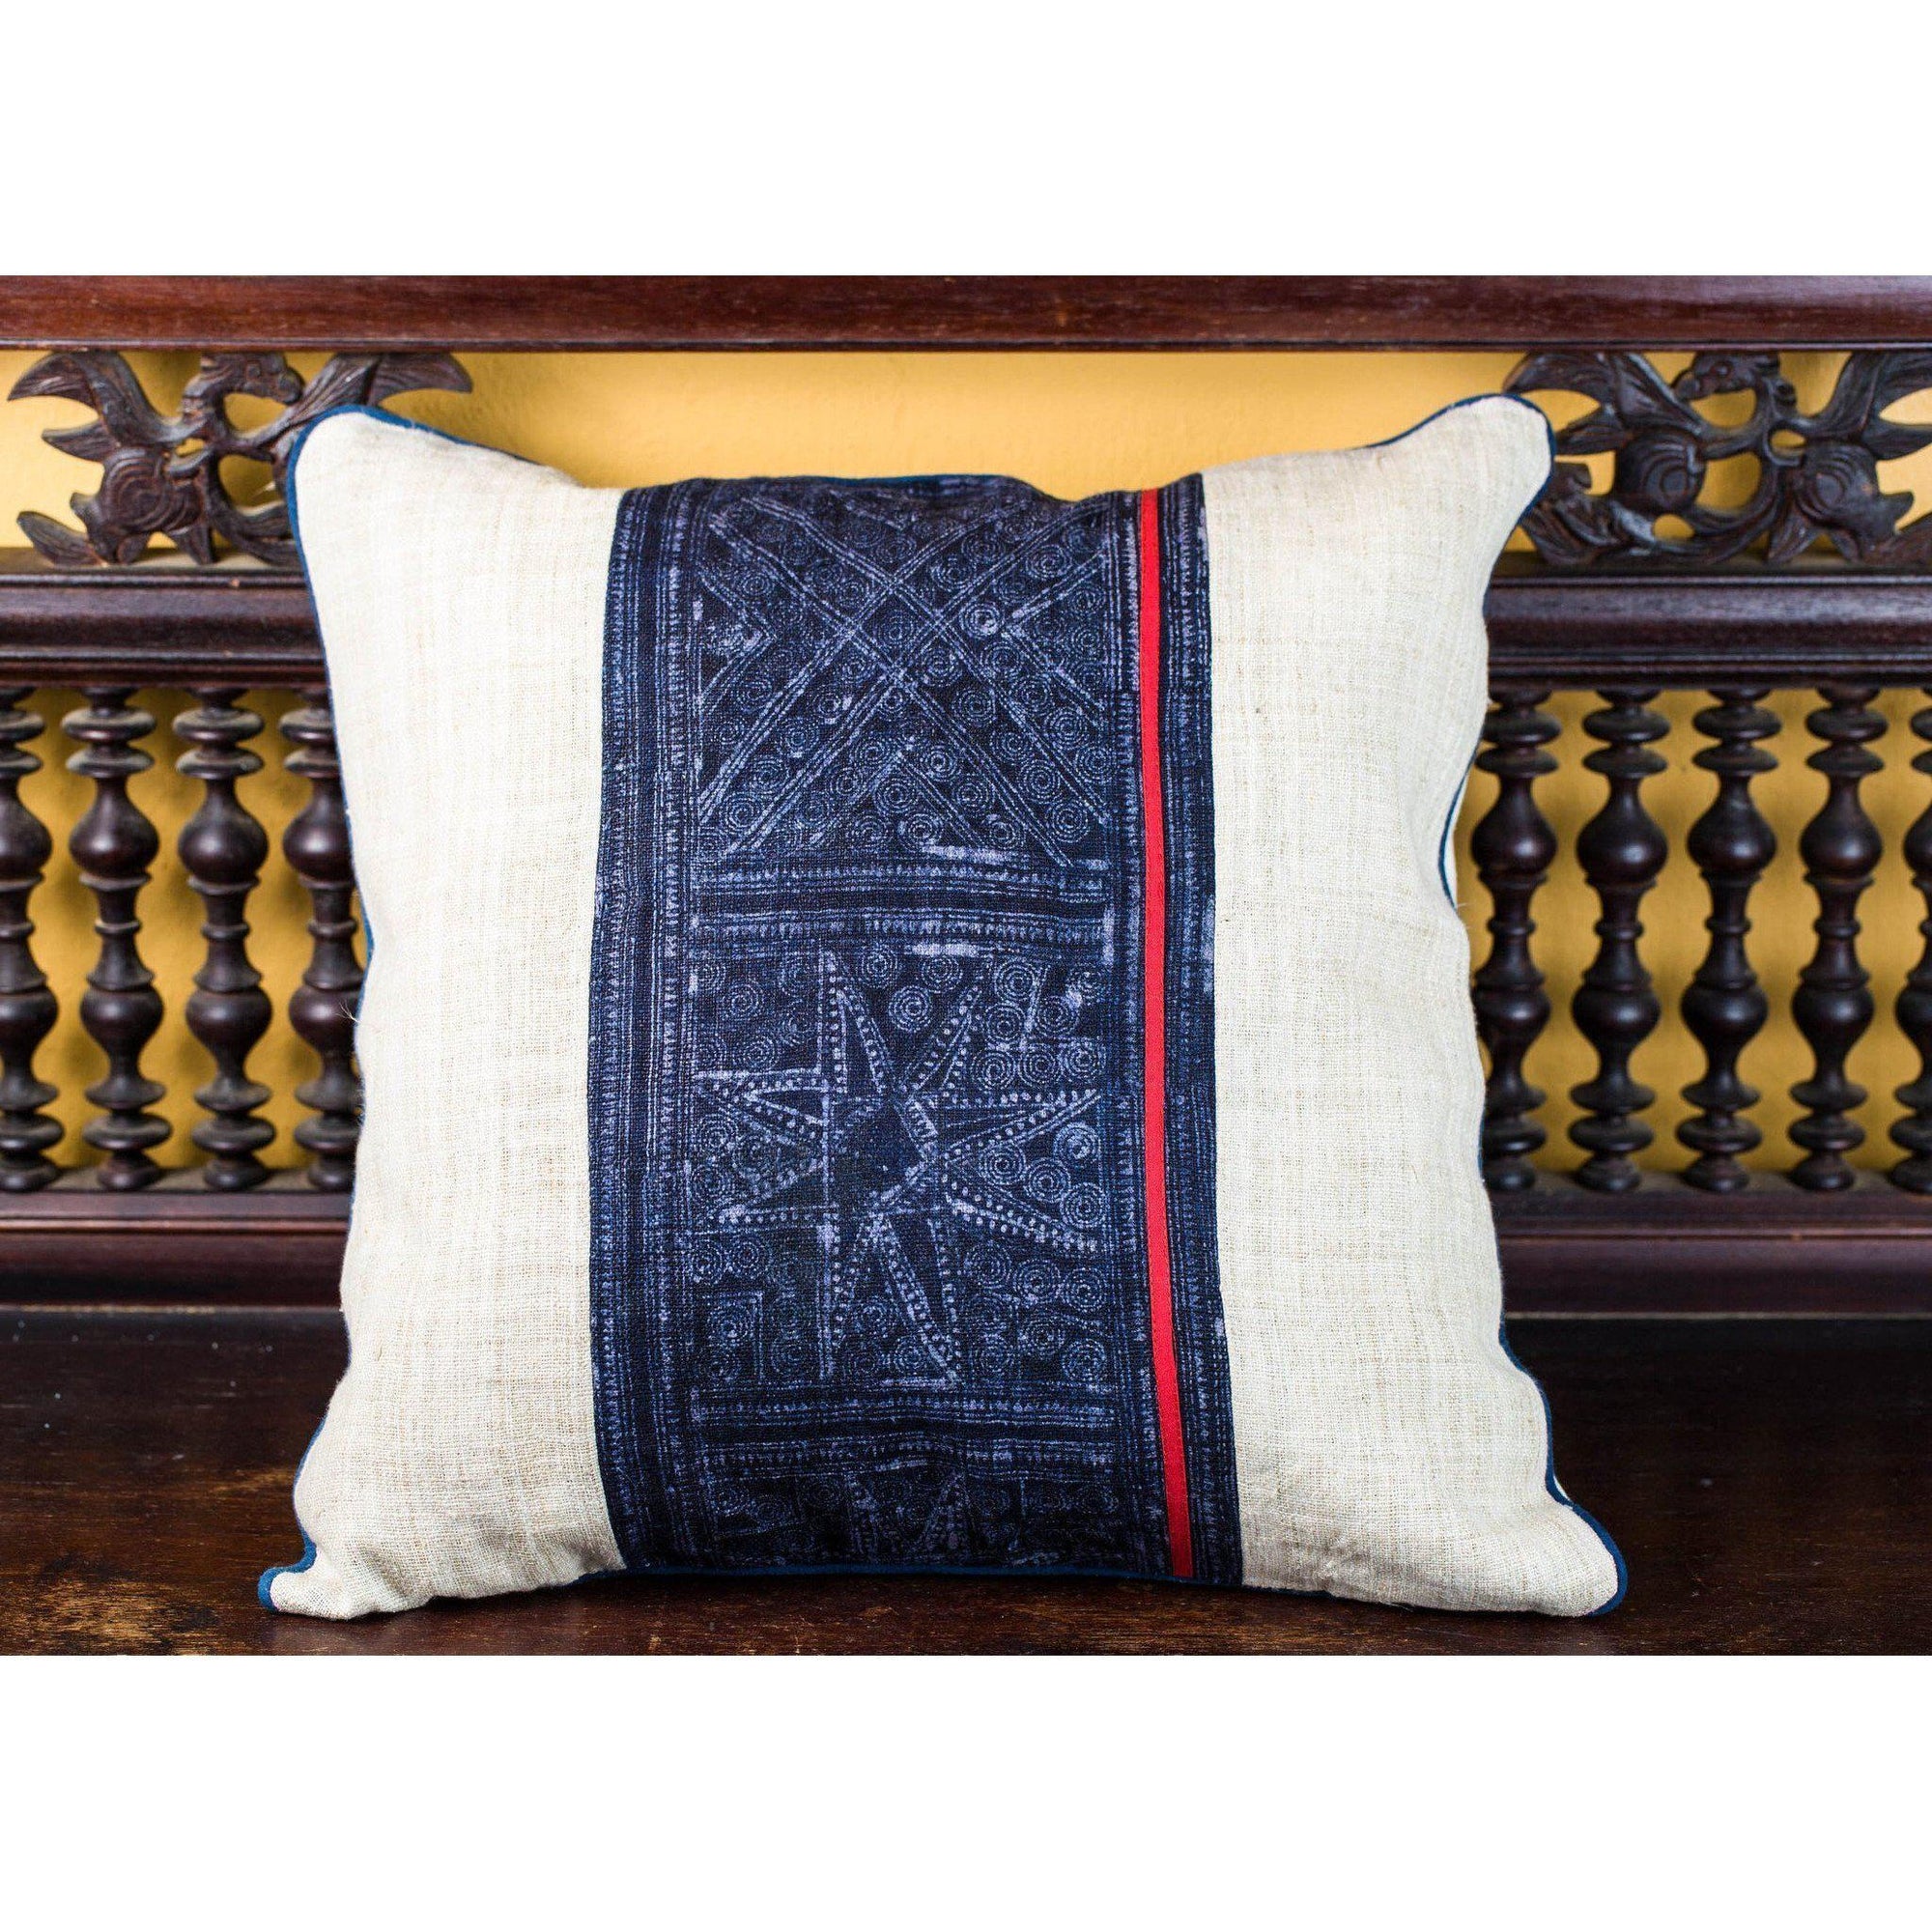 Sapa River Cushion Cover-Villagecraft Planet-Temples and Markets